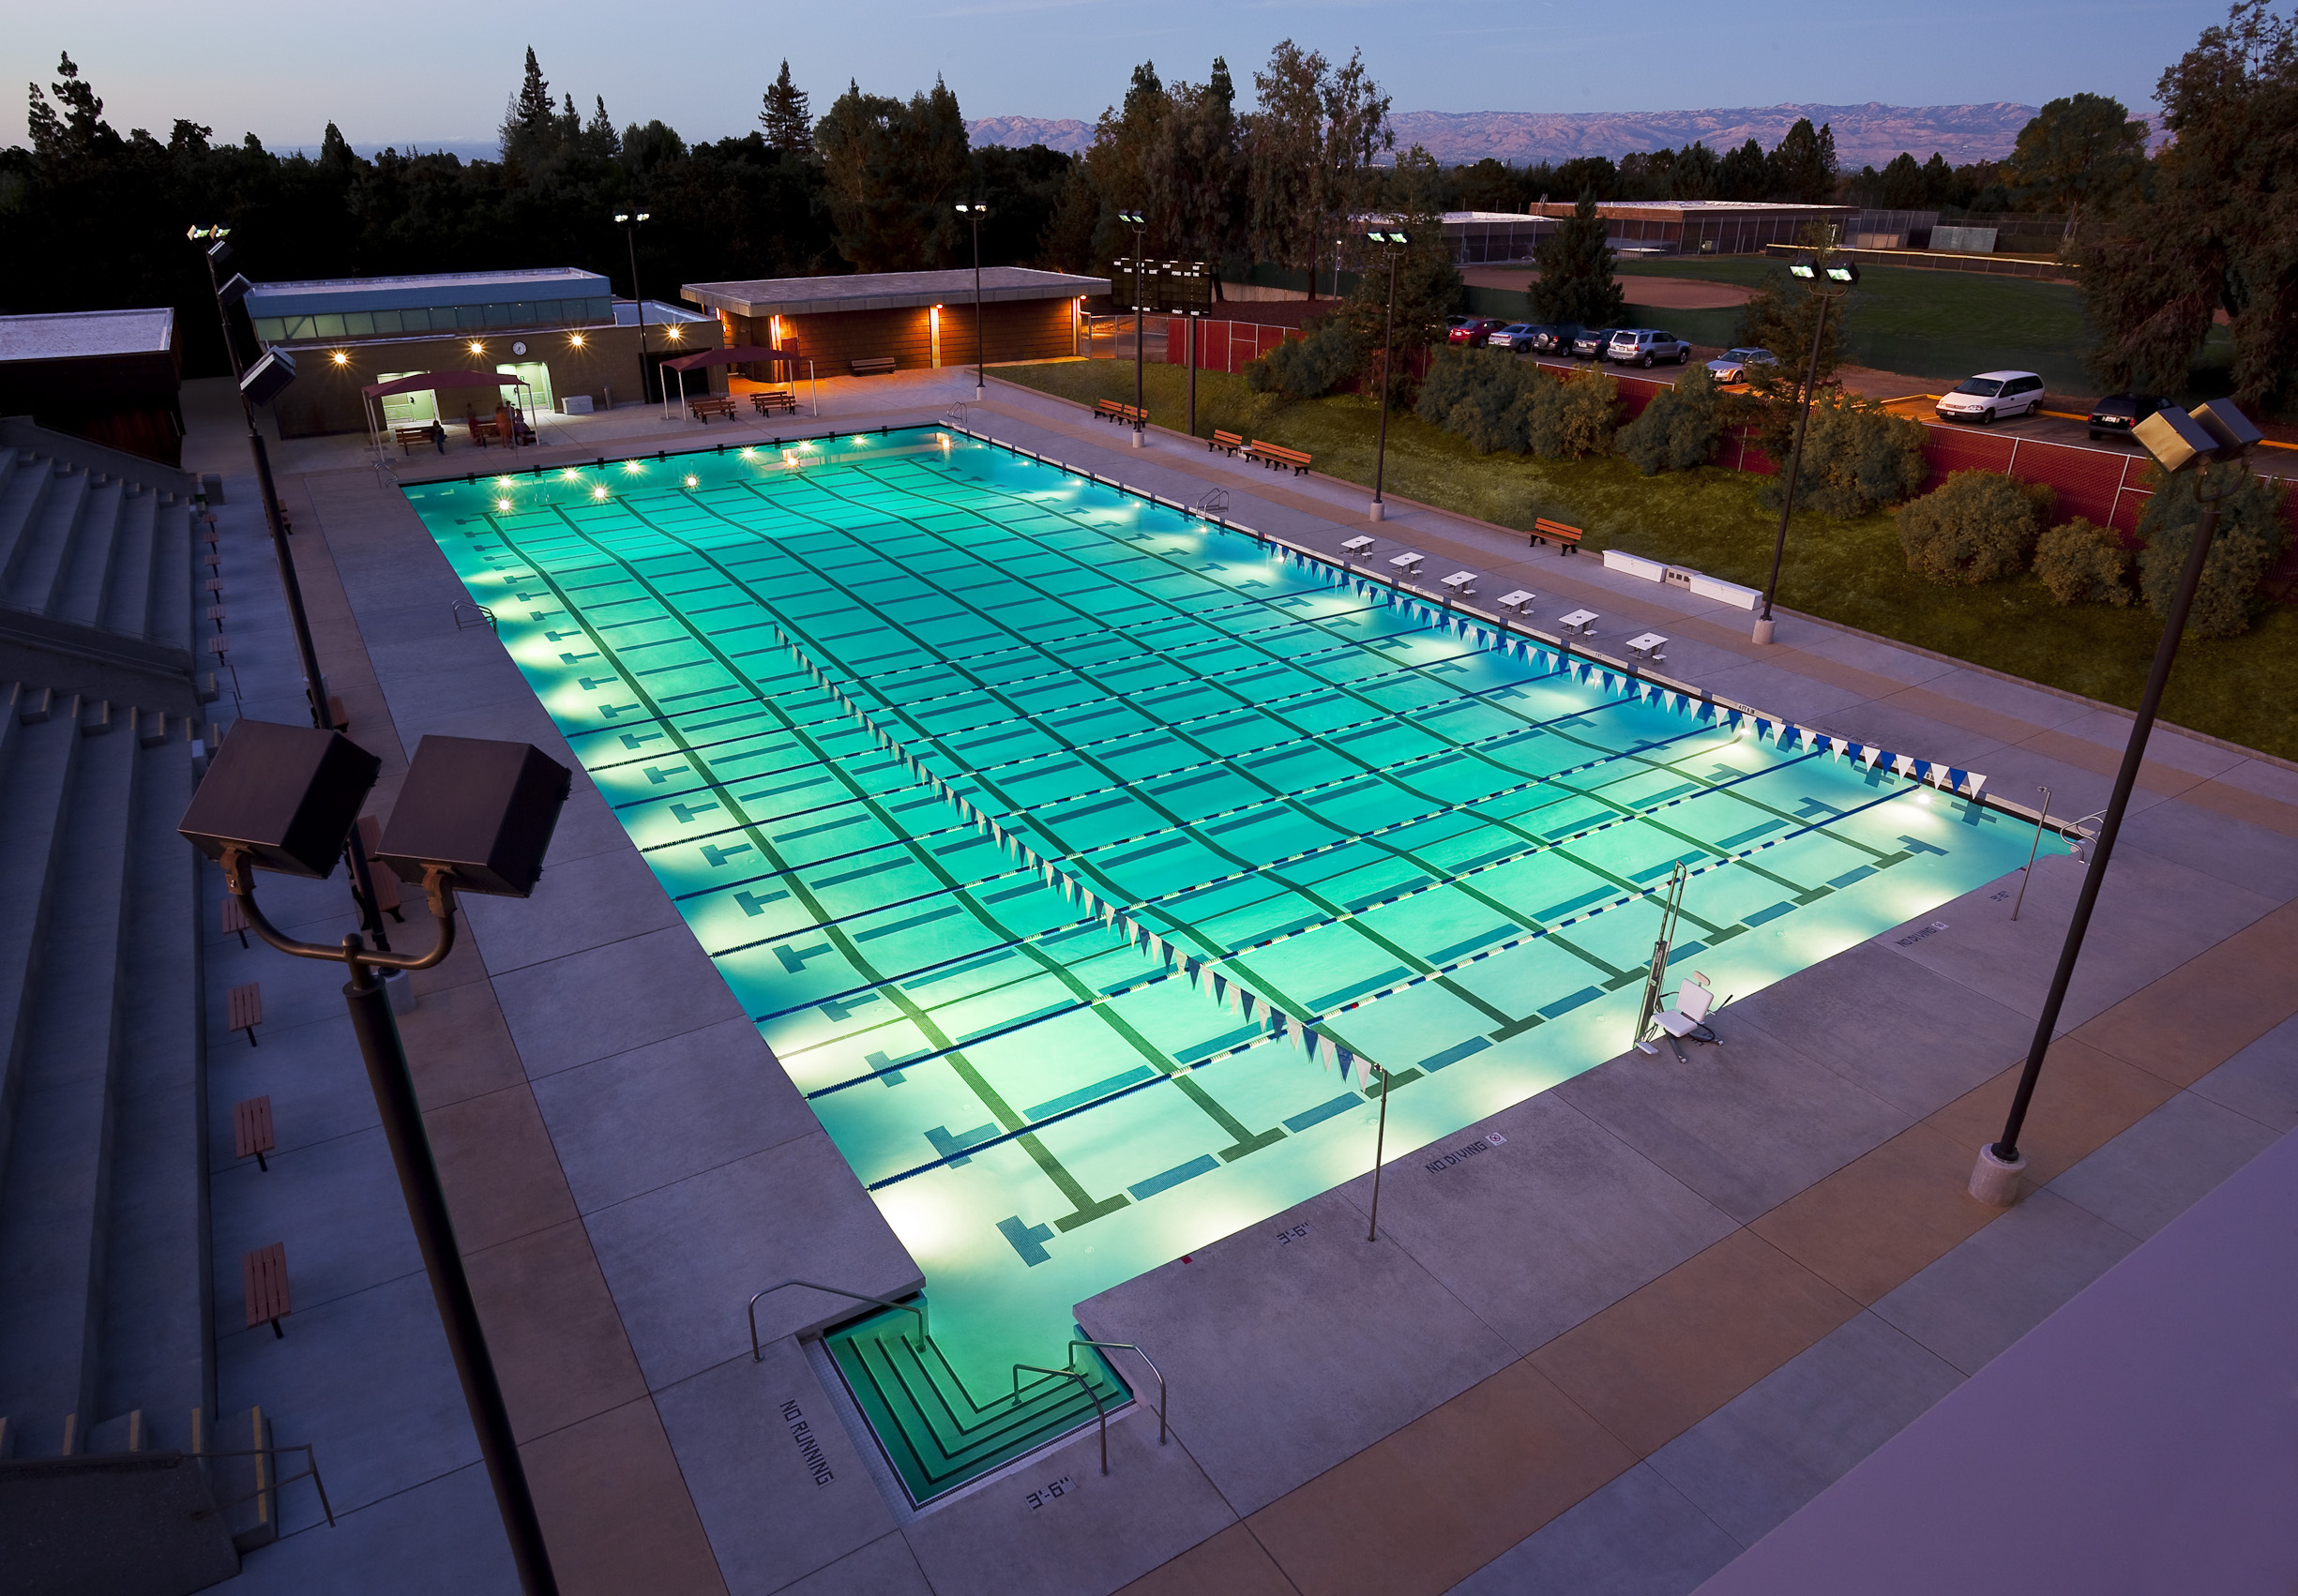 WEST VALLEY COLLEGE POOL